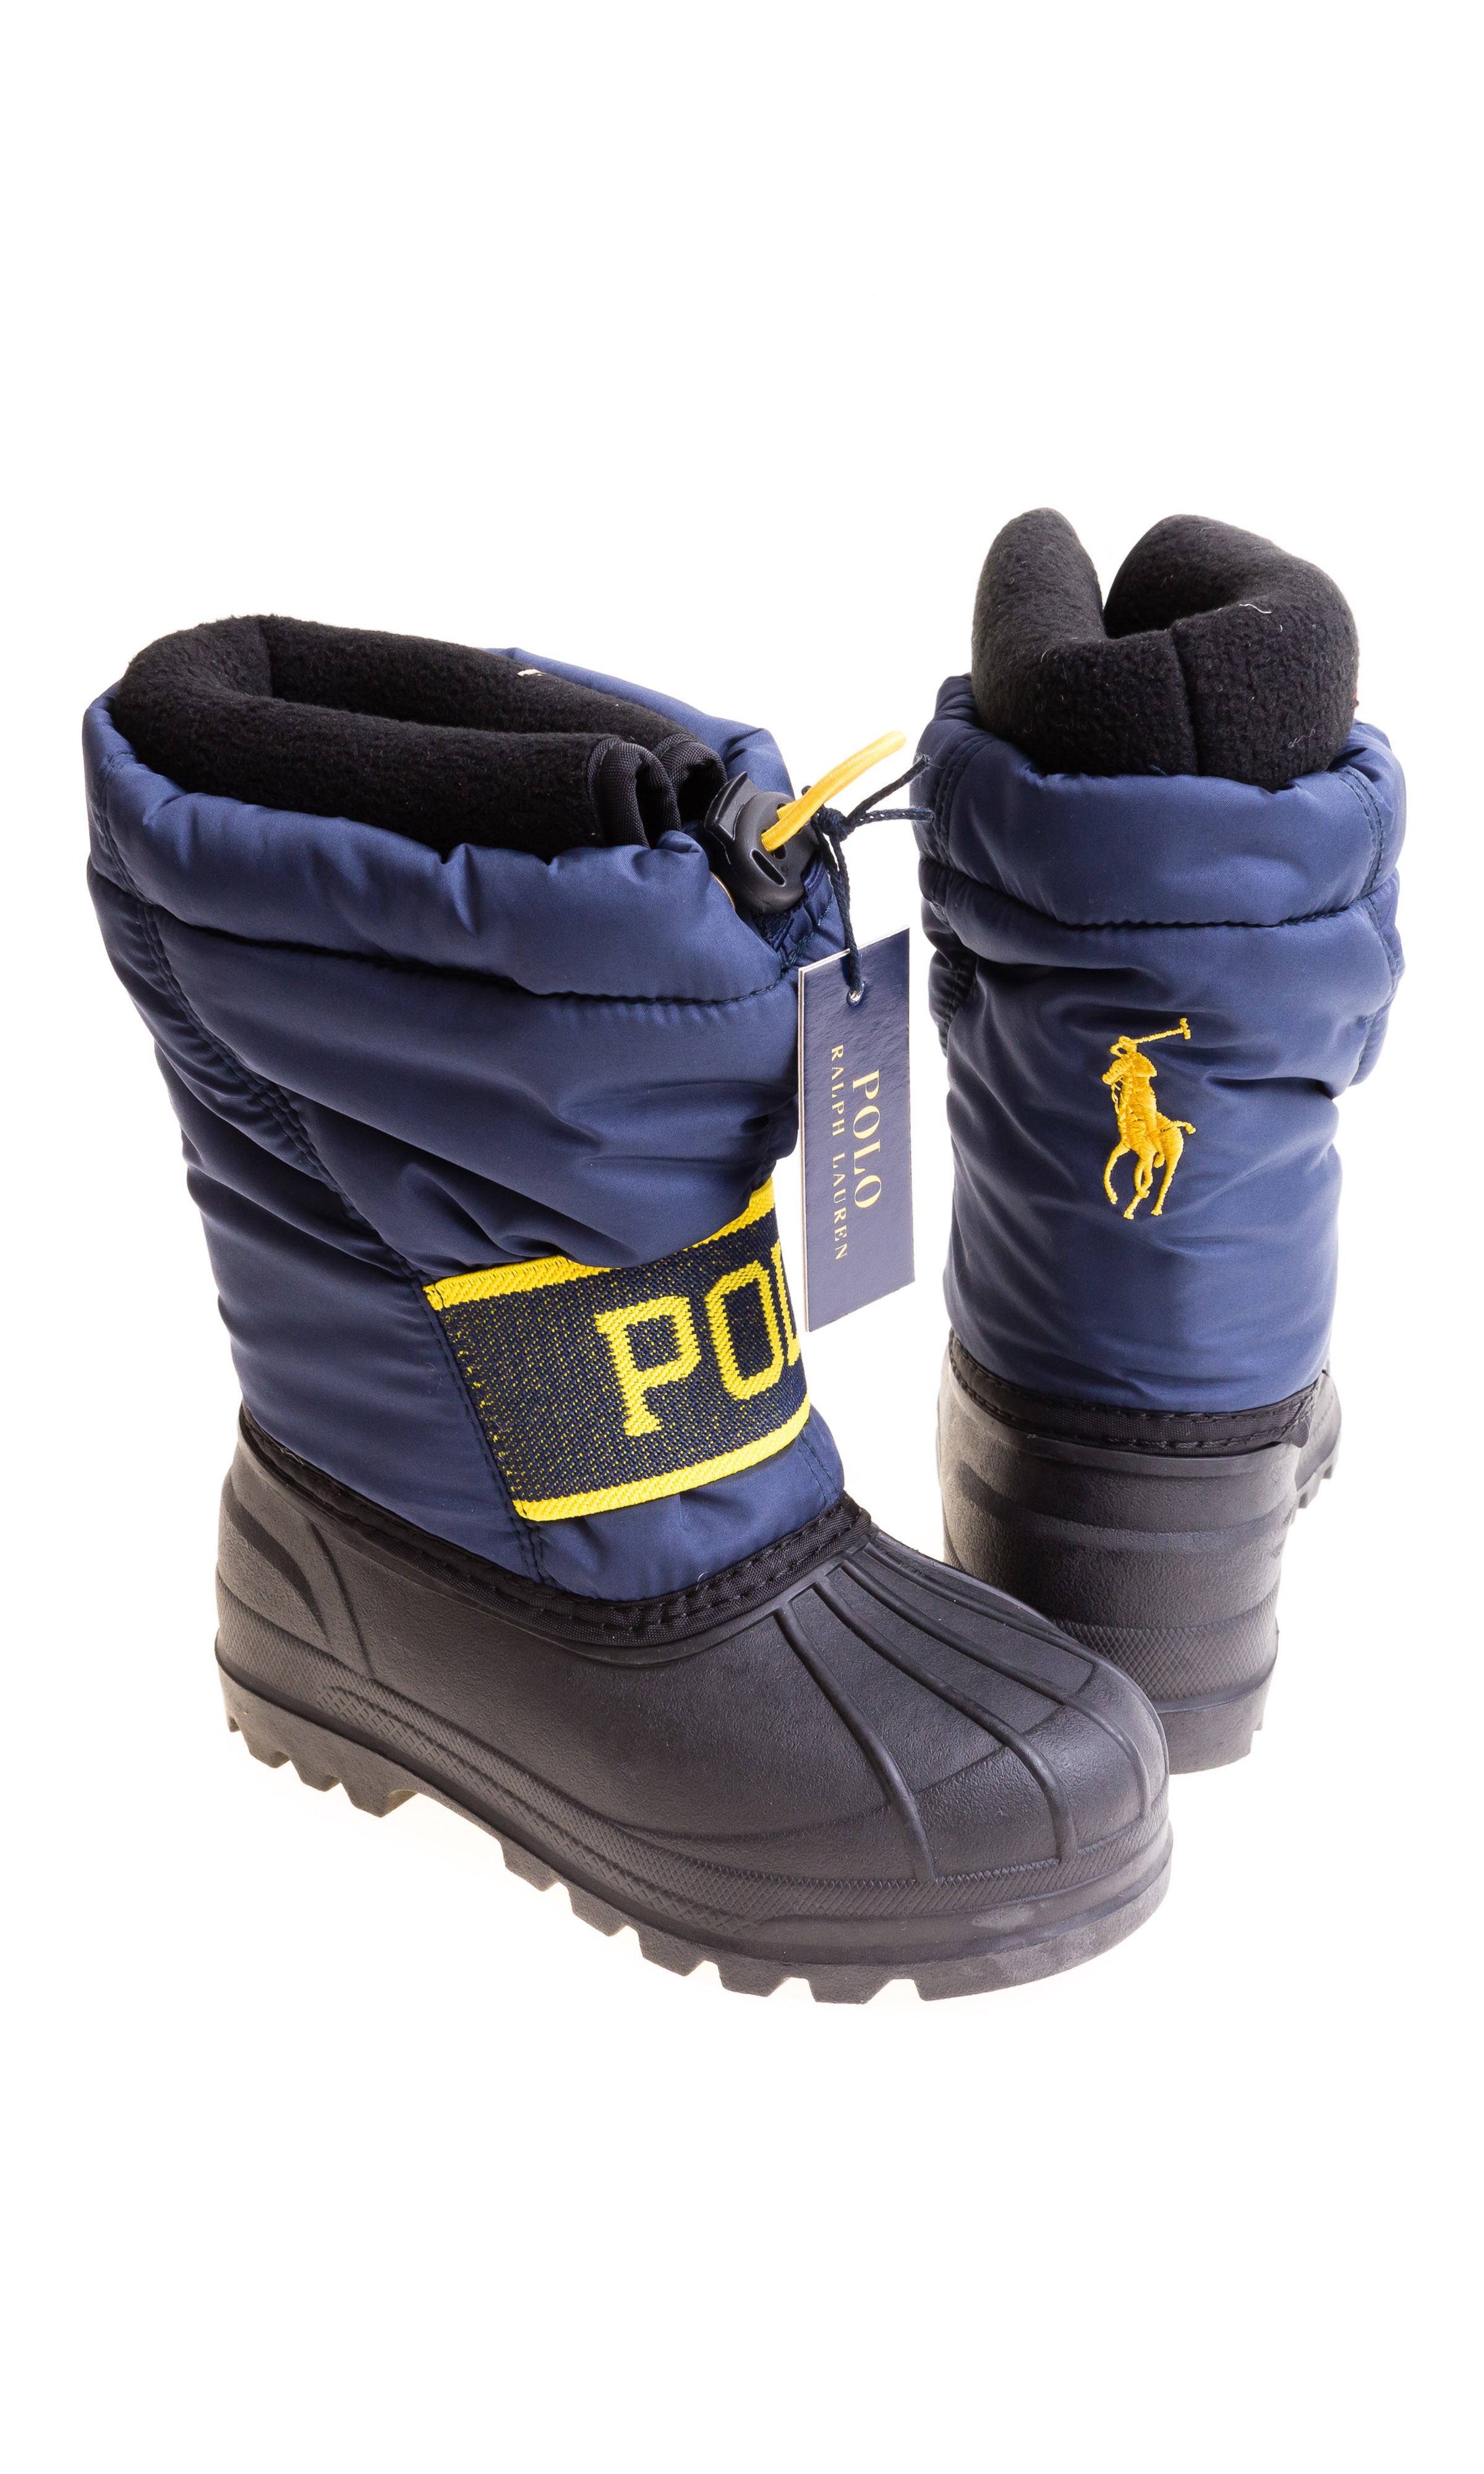 polo boots navy blue